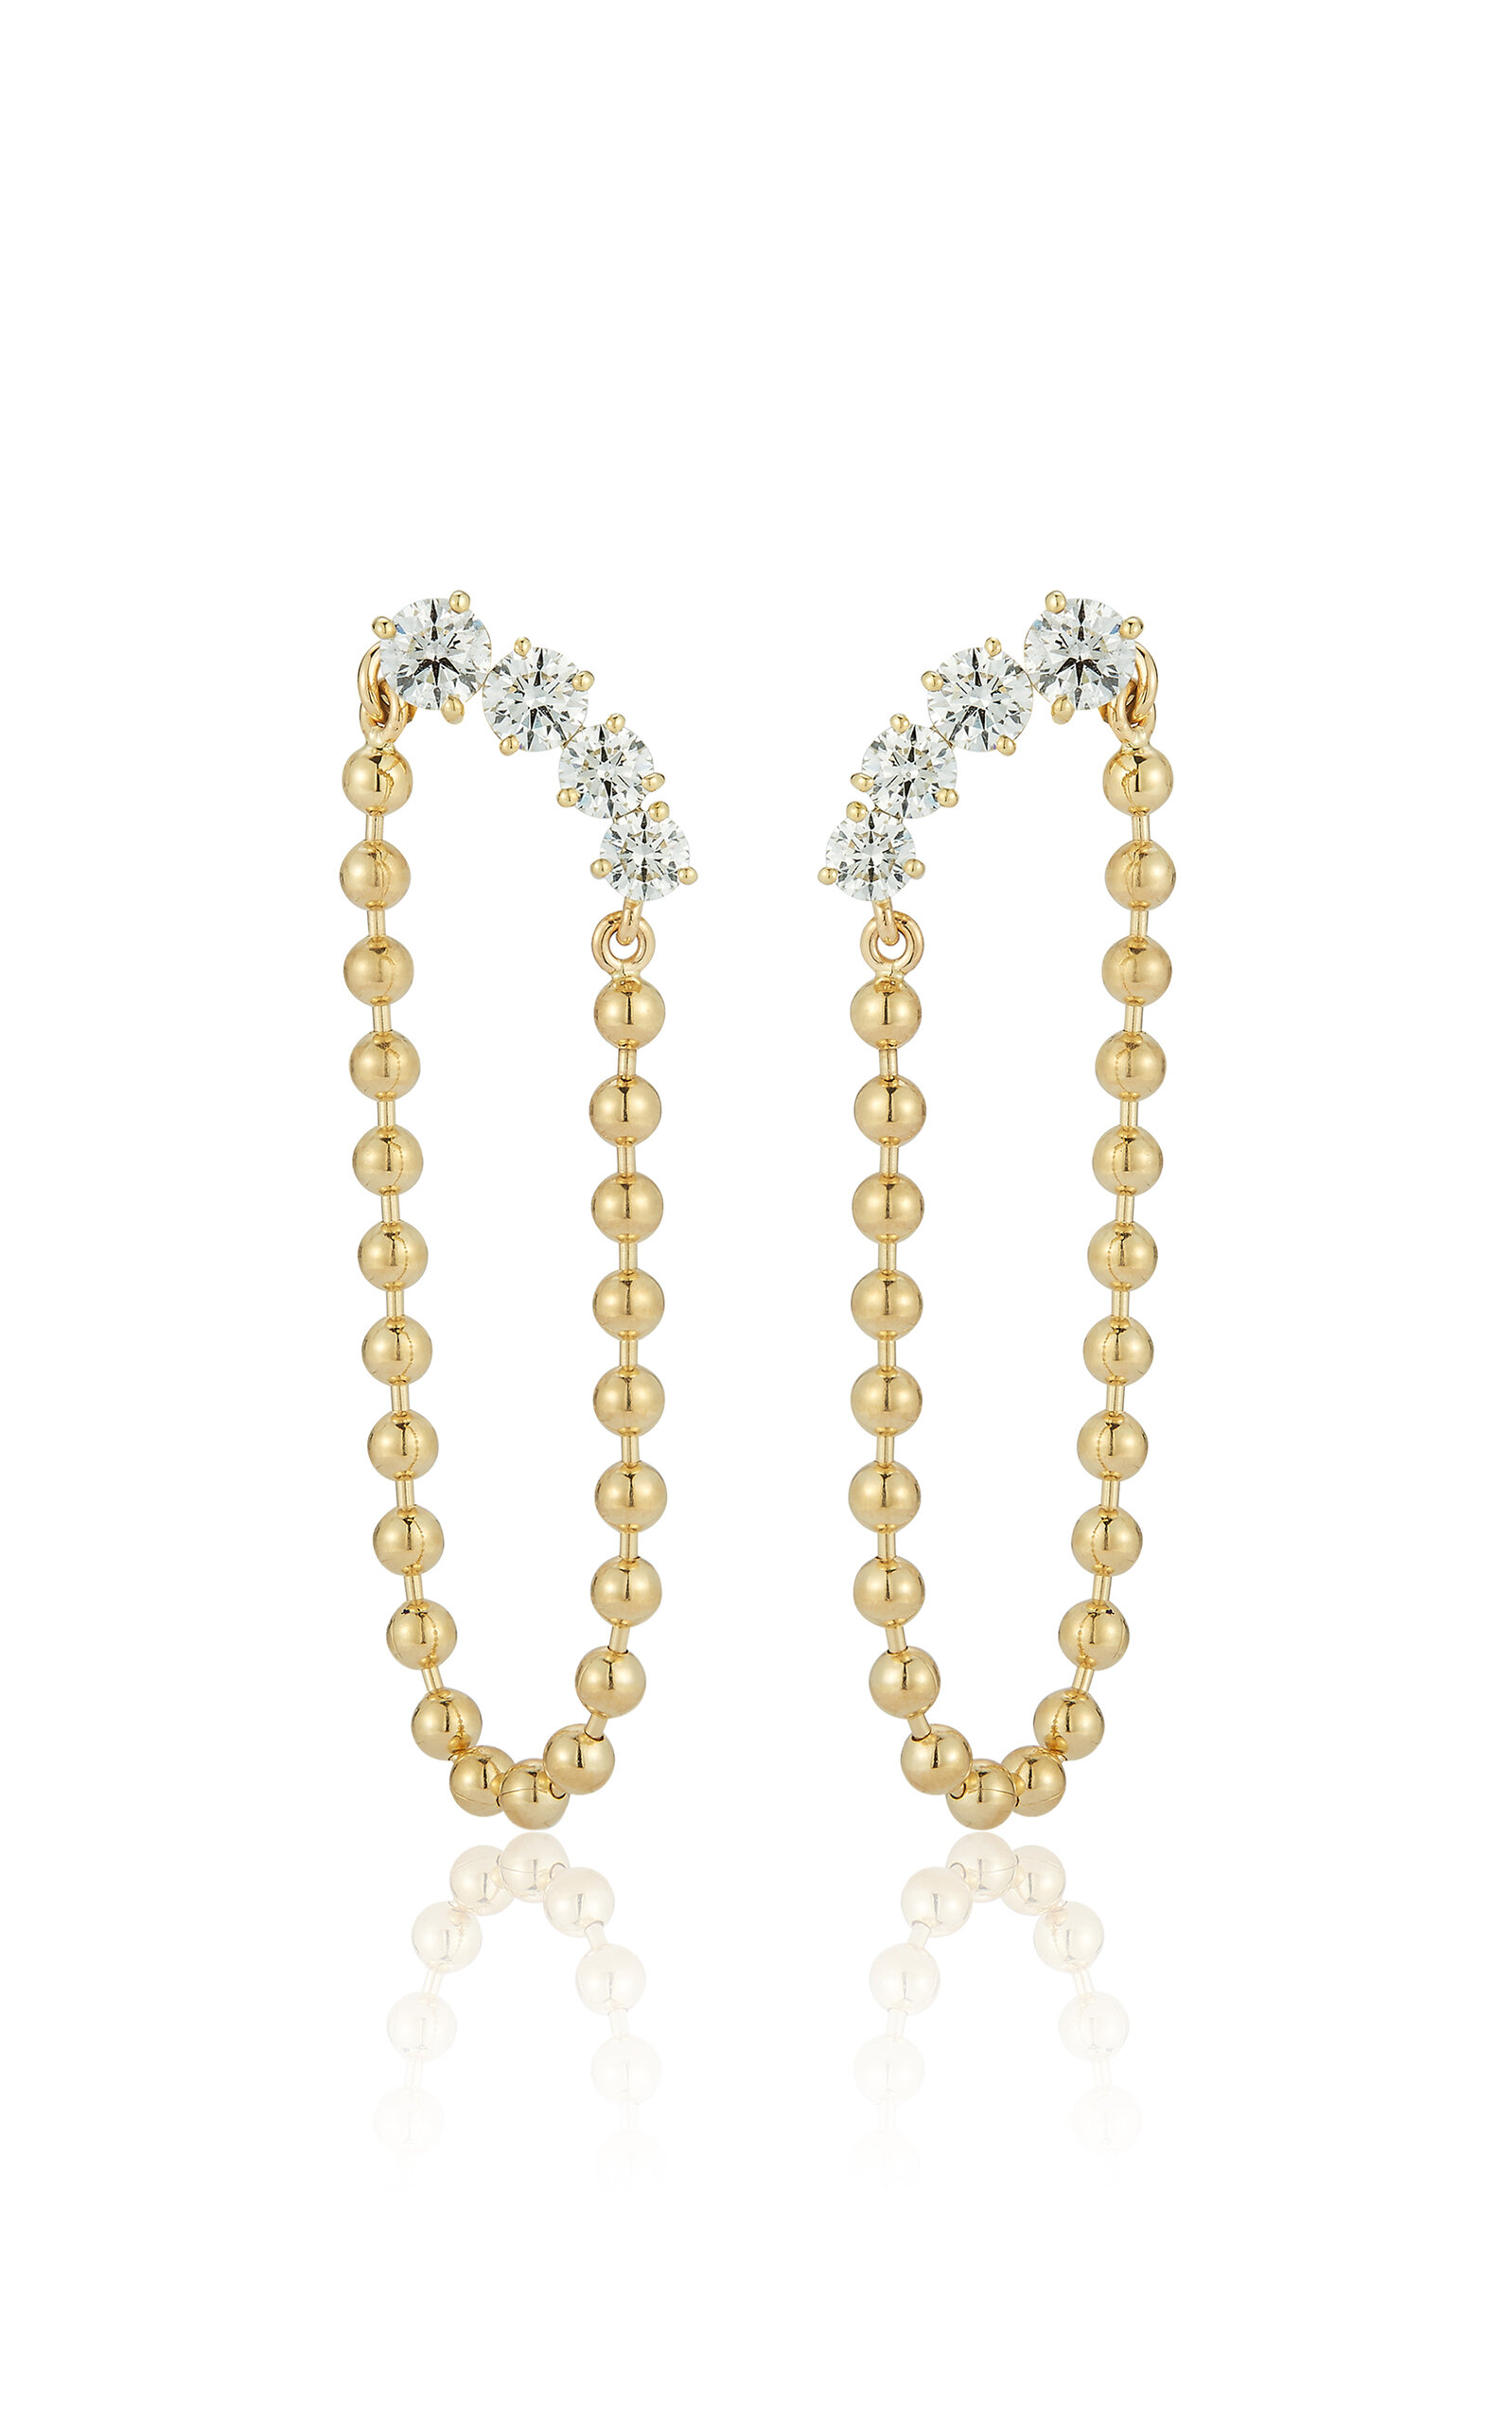 18k Yellow Gold Connexion Diamond and Chain Loop Earrings